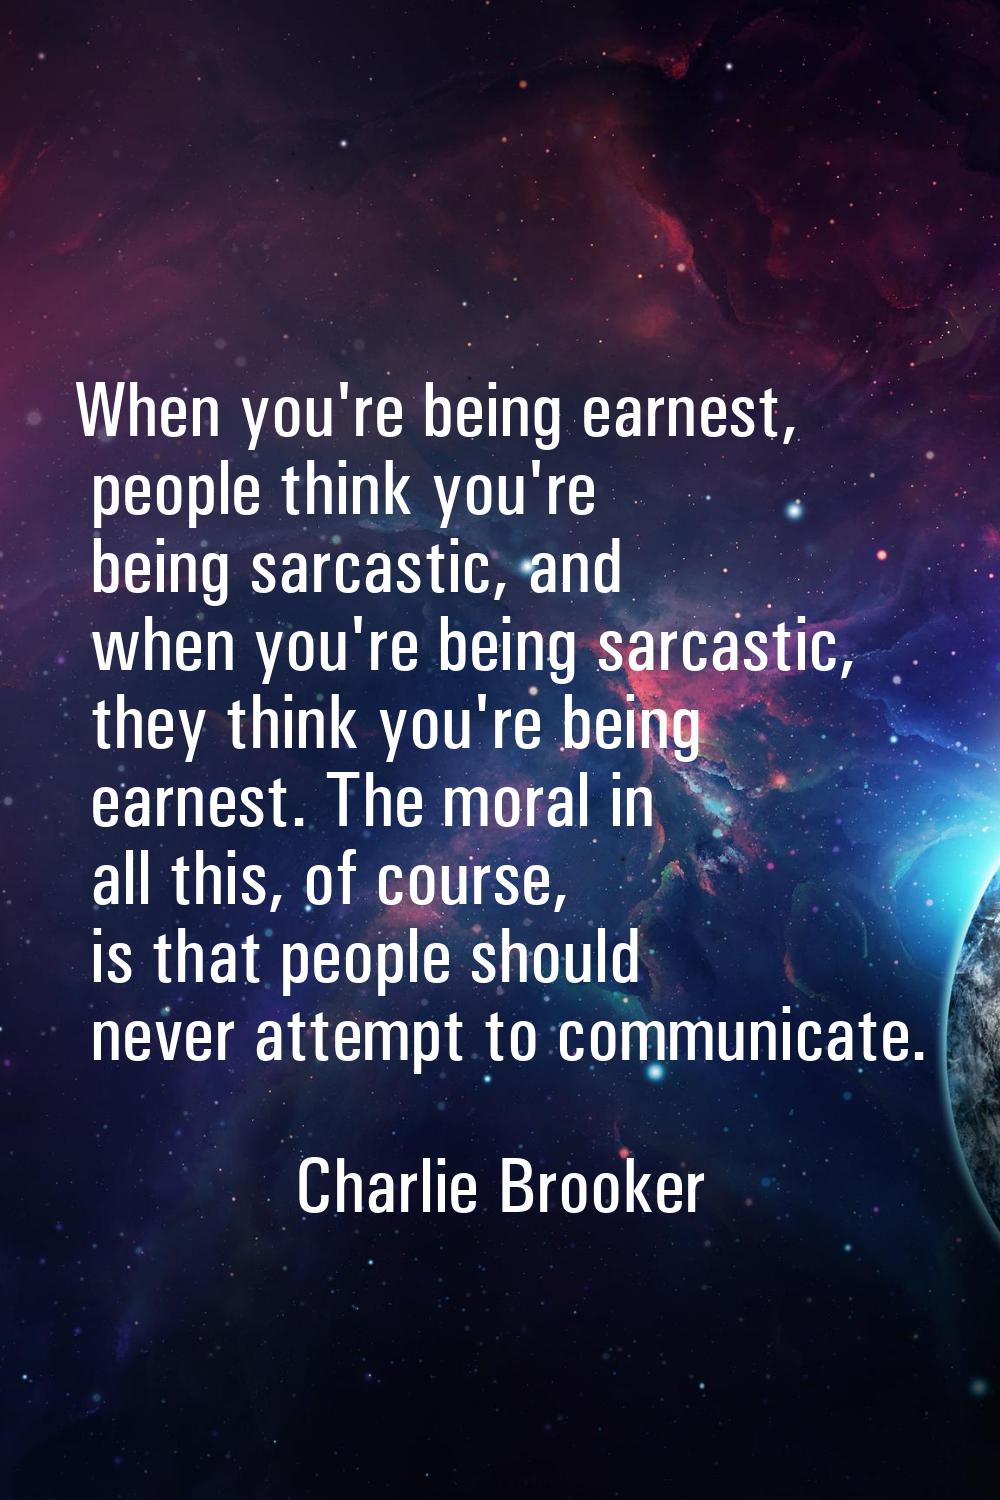 When you're being earnest, people think you're being sarcastic, and when you're being sarcastic, th